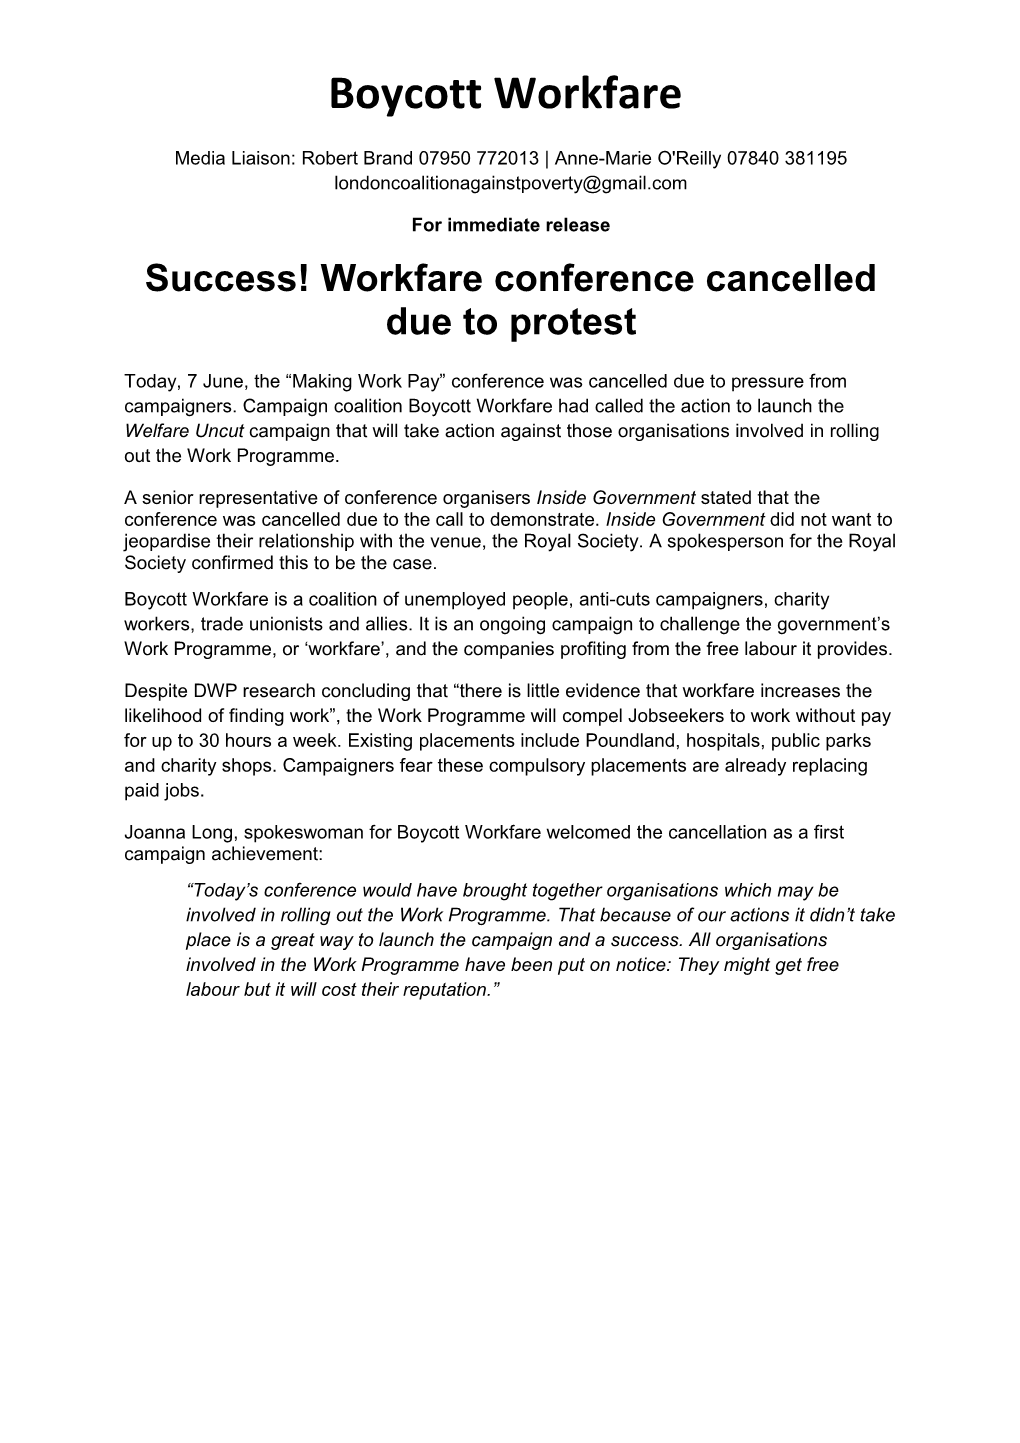 Success! Workfare Conference Cancelled Due to Protest